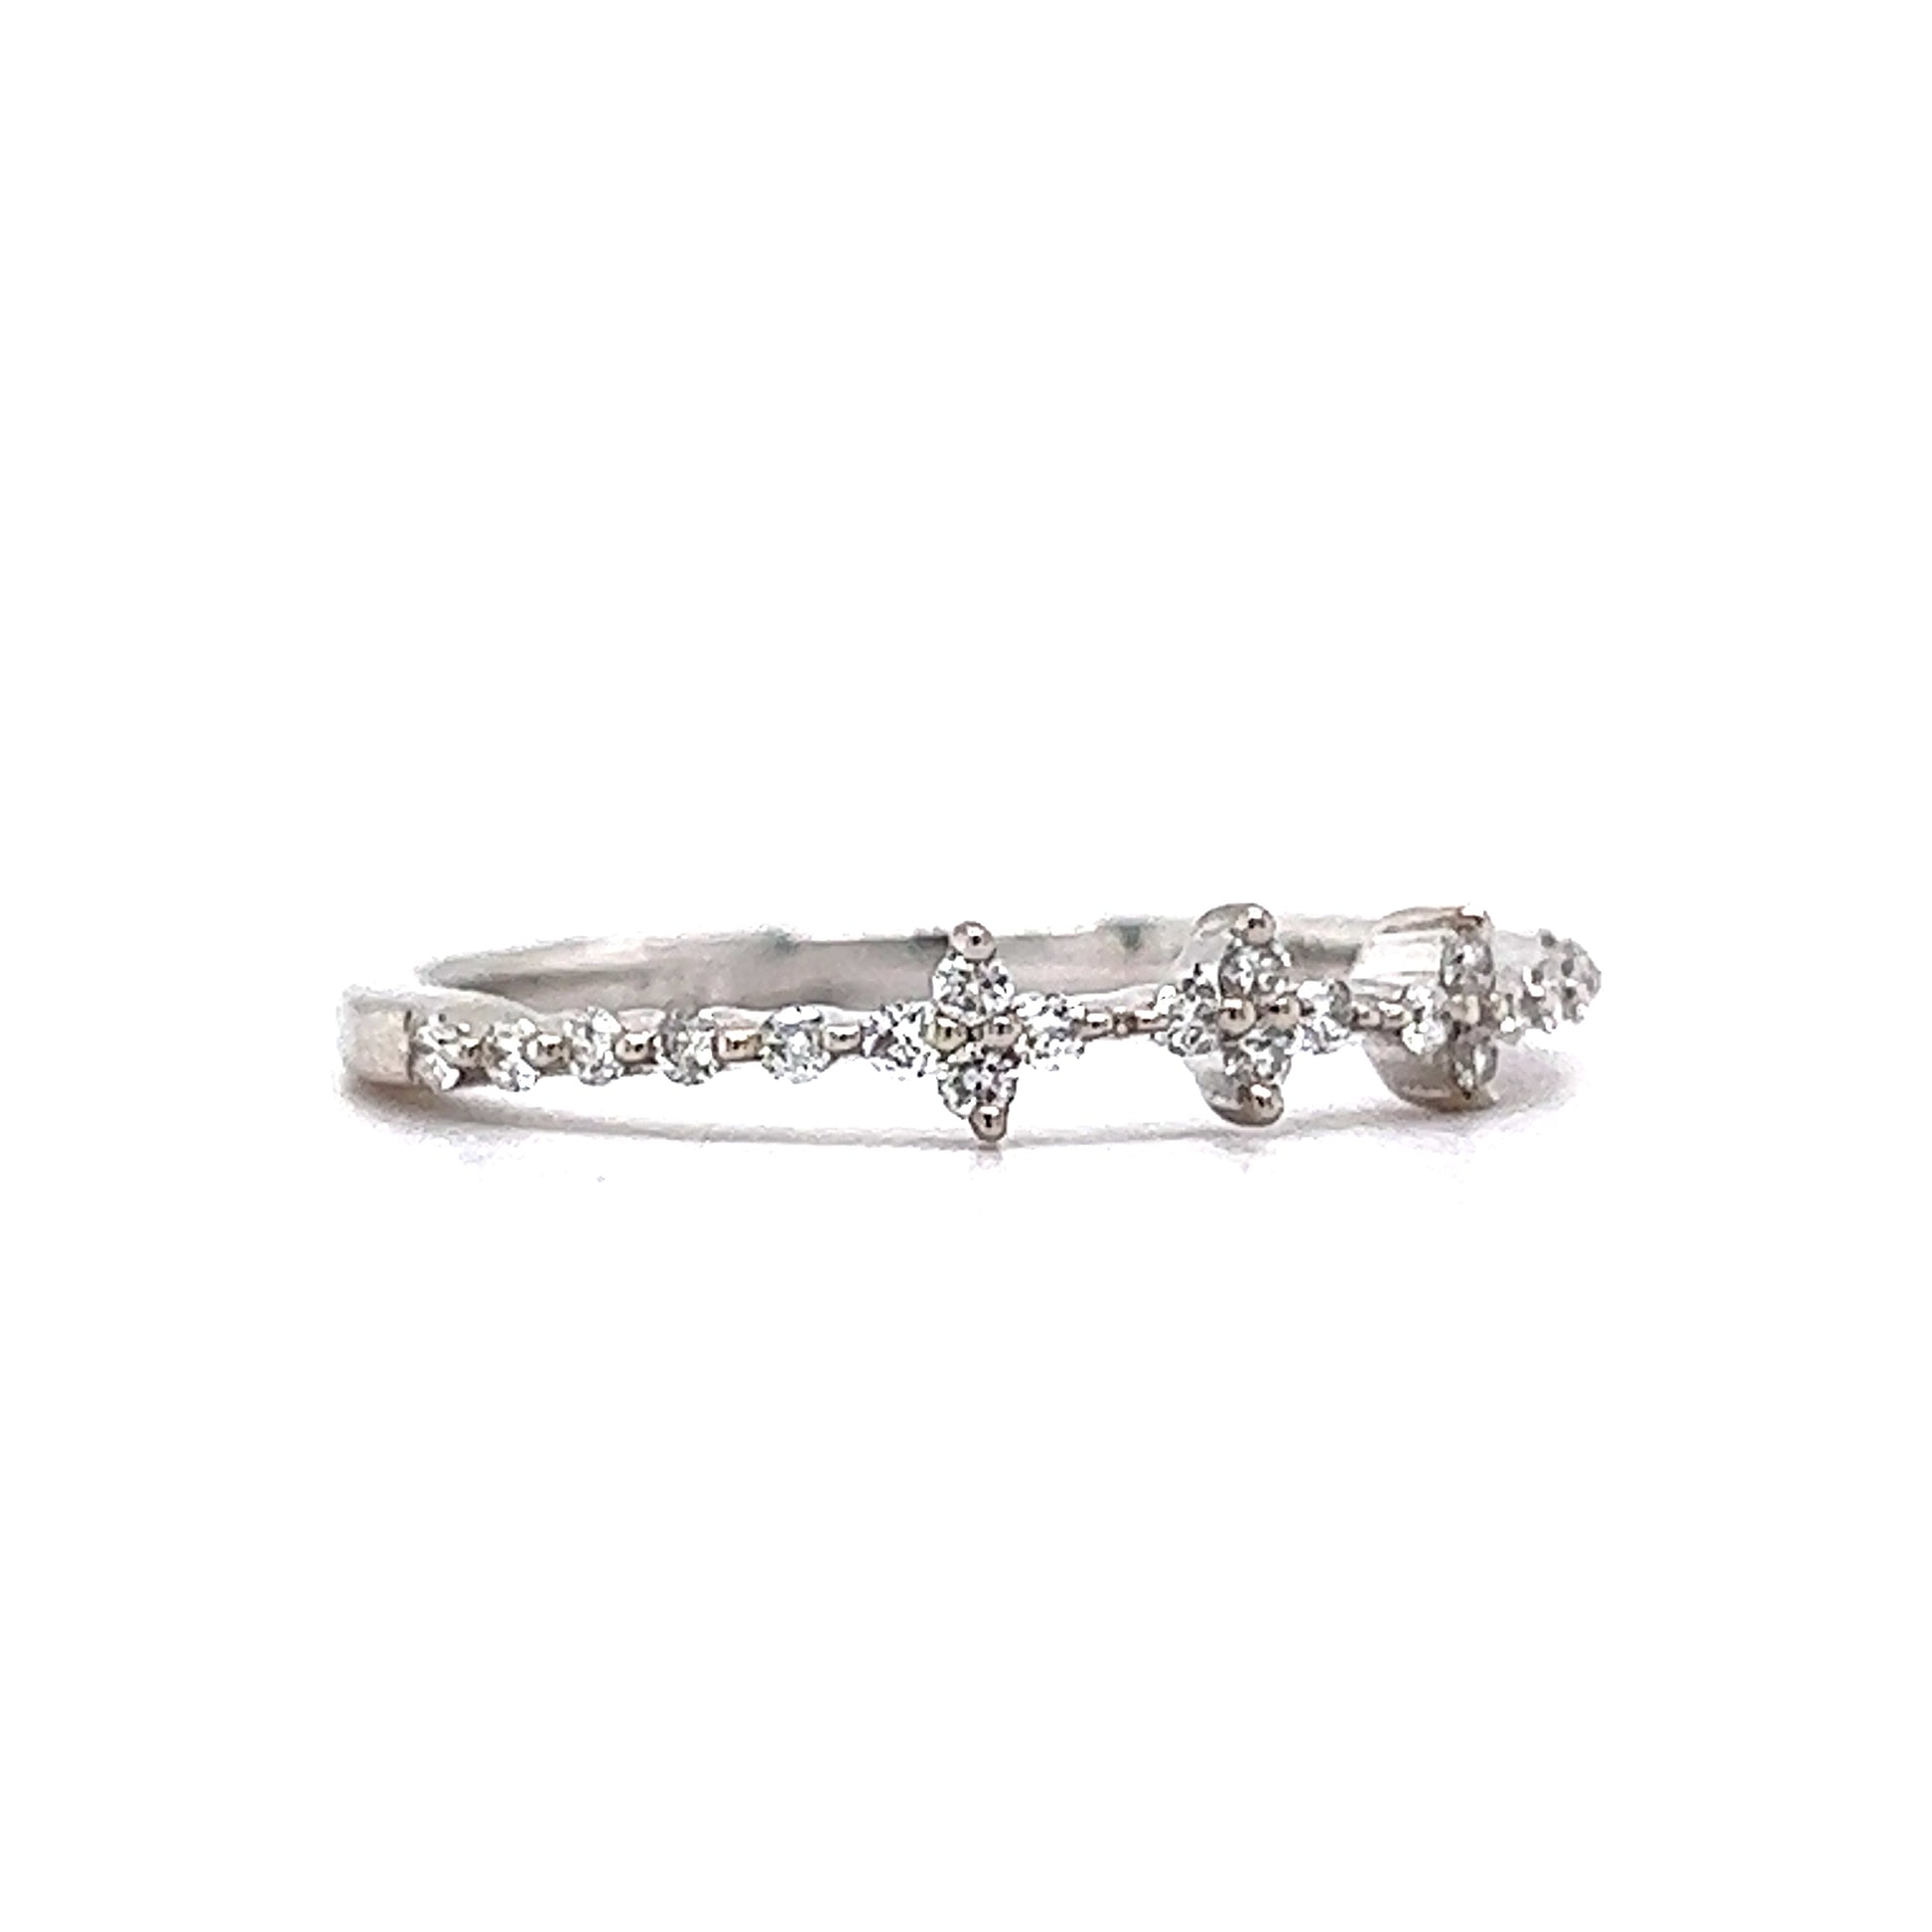 White Flower Dainty Stacking Ring